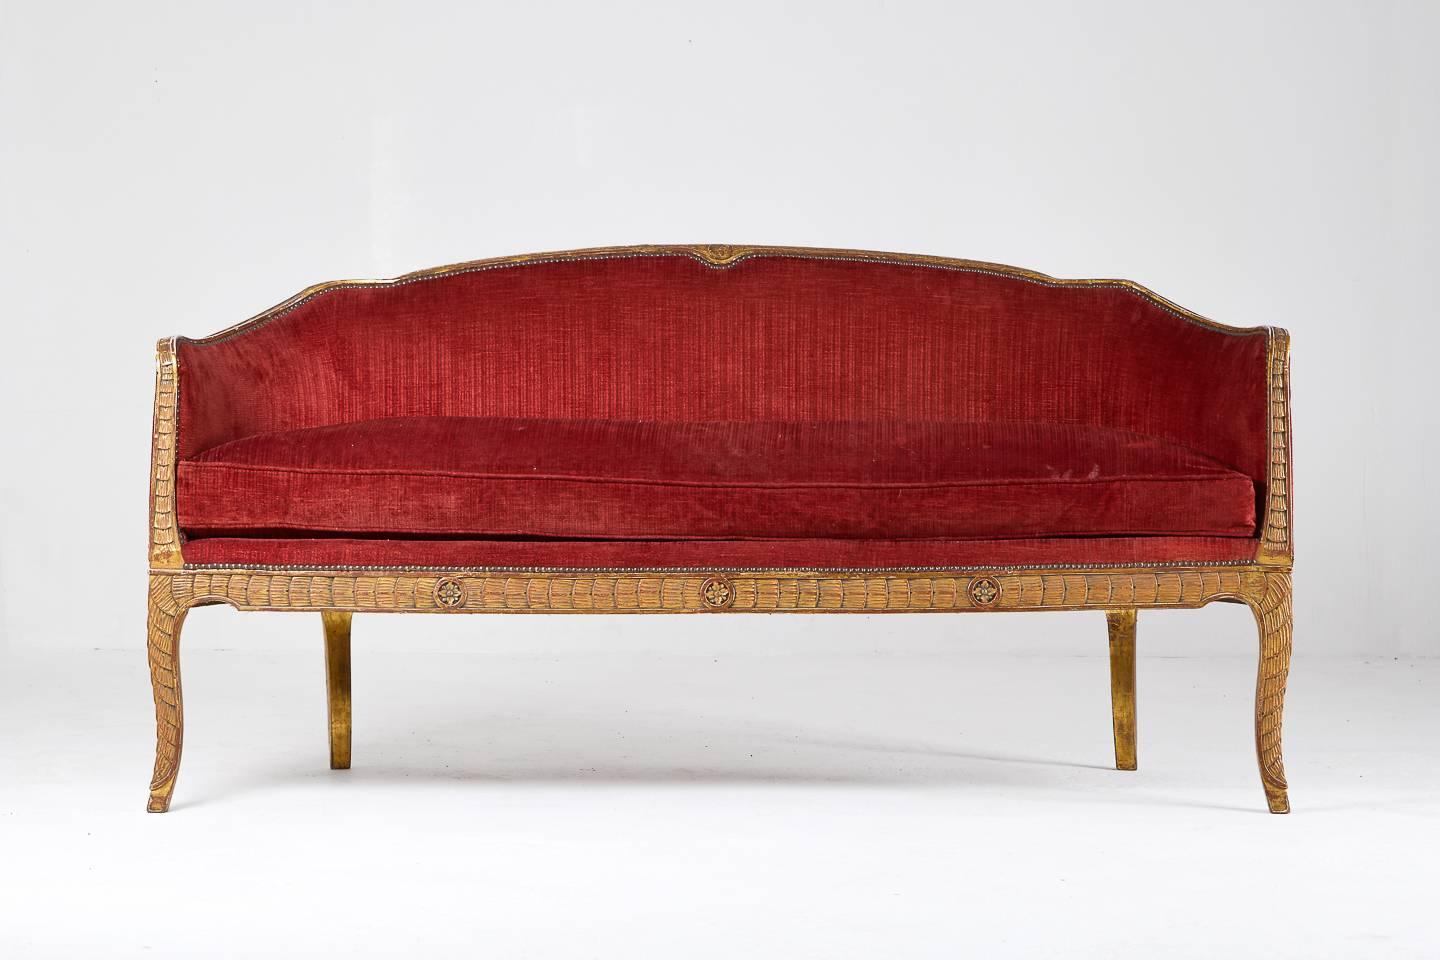 This stunning and rare Italian carved and gilded 18th Century sofa in its original condition has been upholstered with red 1950s fabric. It has fantastic detailed carved wood.

Seat height: 54 cm.